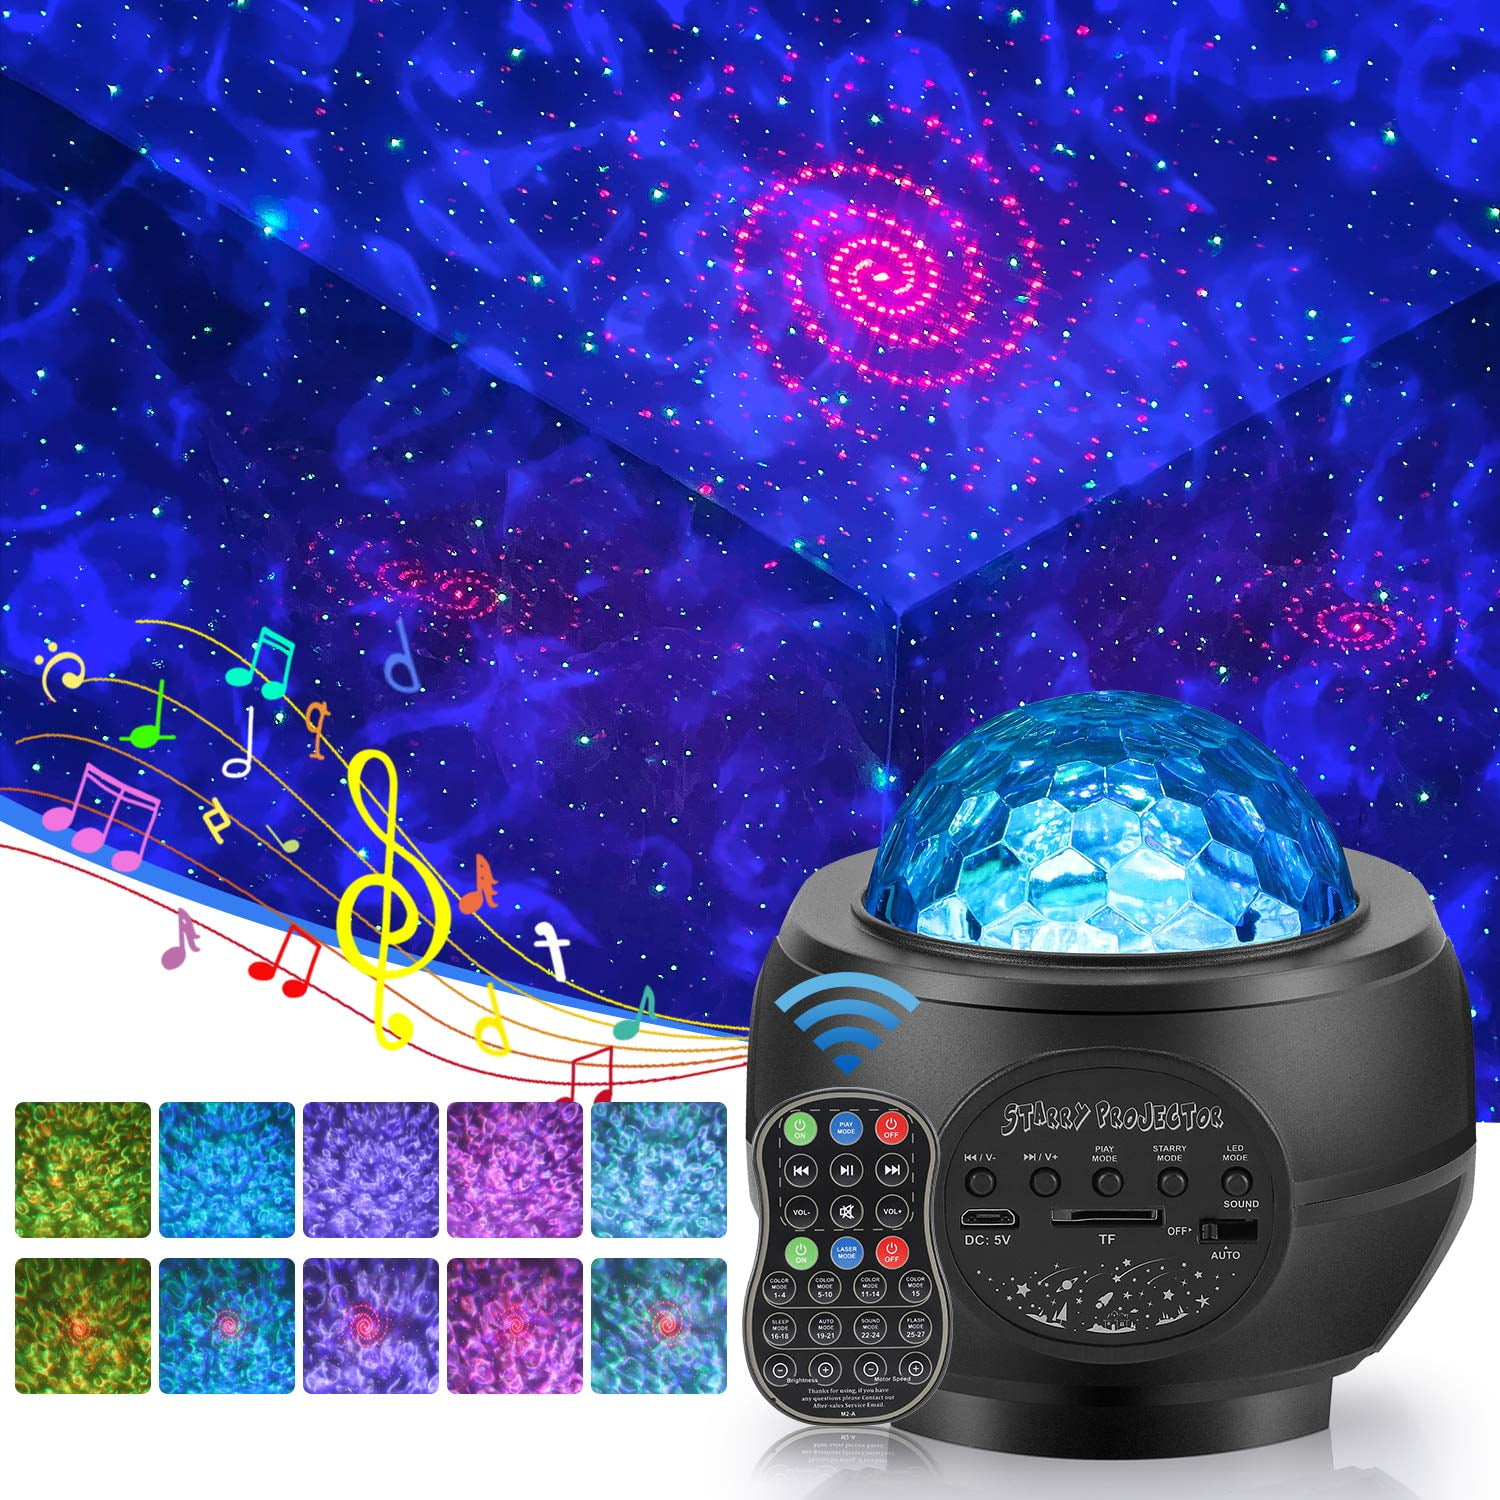 Bluetooth LED Galaxy Starry Night Light Projector Ocean Star Sky Party Lamp Gift 